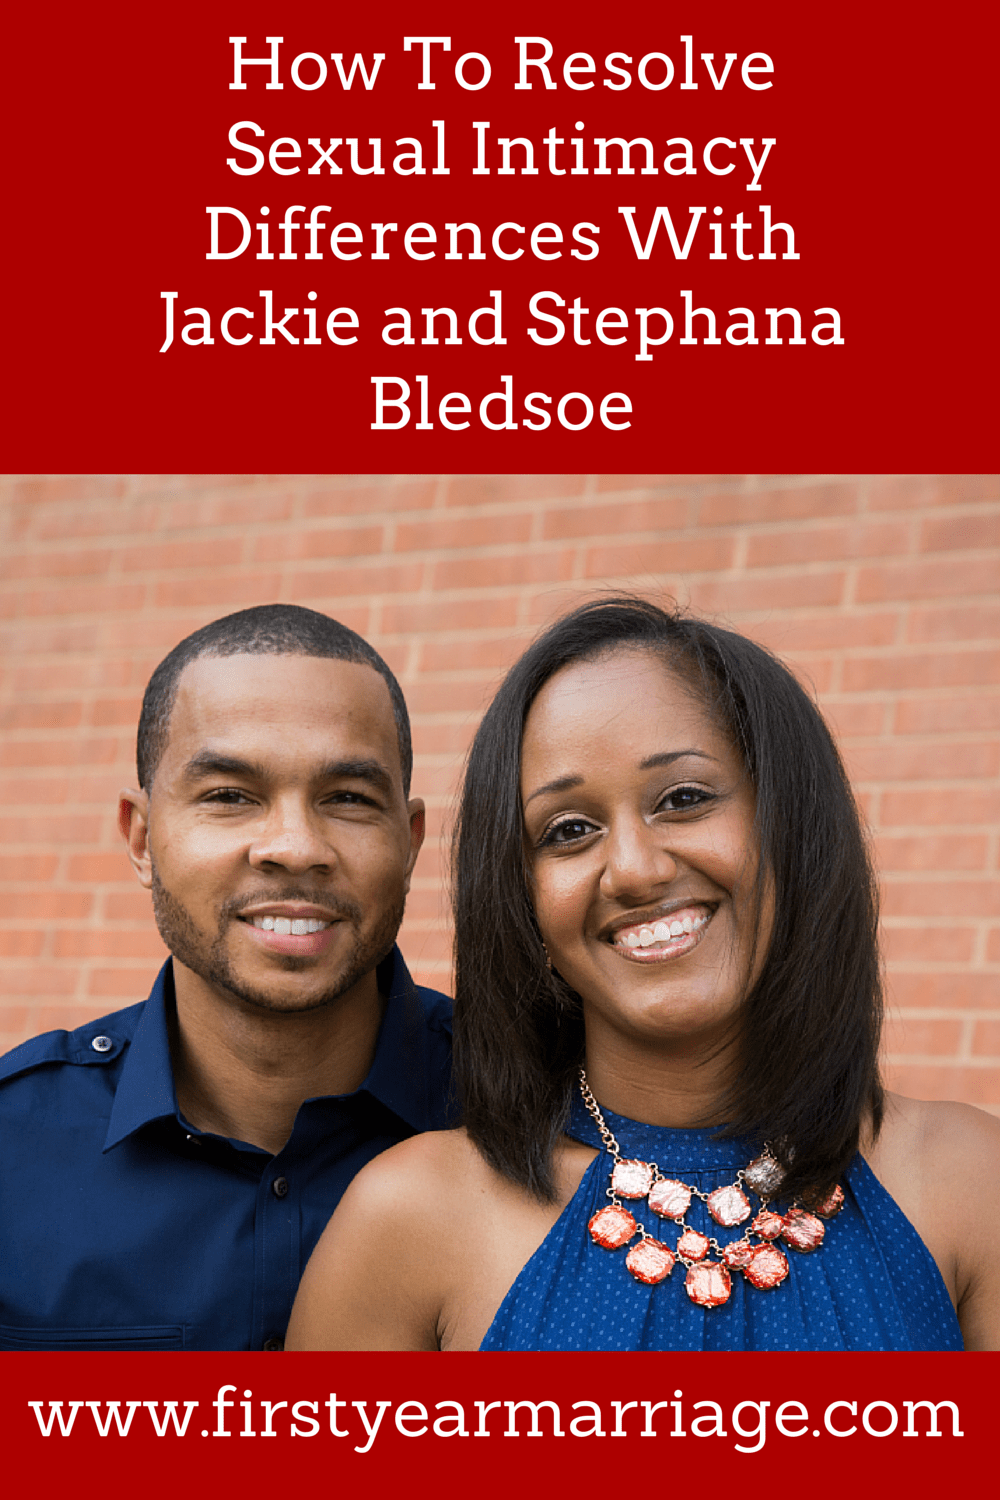 How To Resolve Sexual Intimacy Differences With Jackie and Stephana Bledsoe